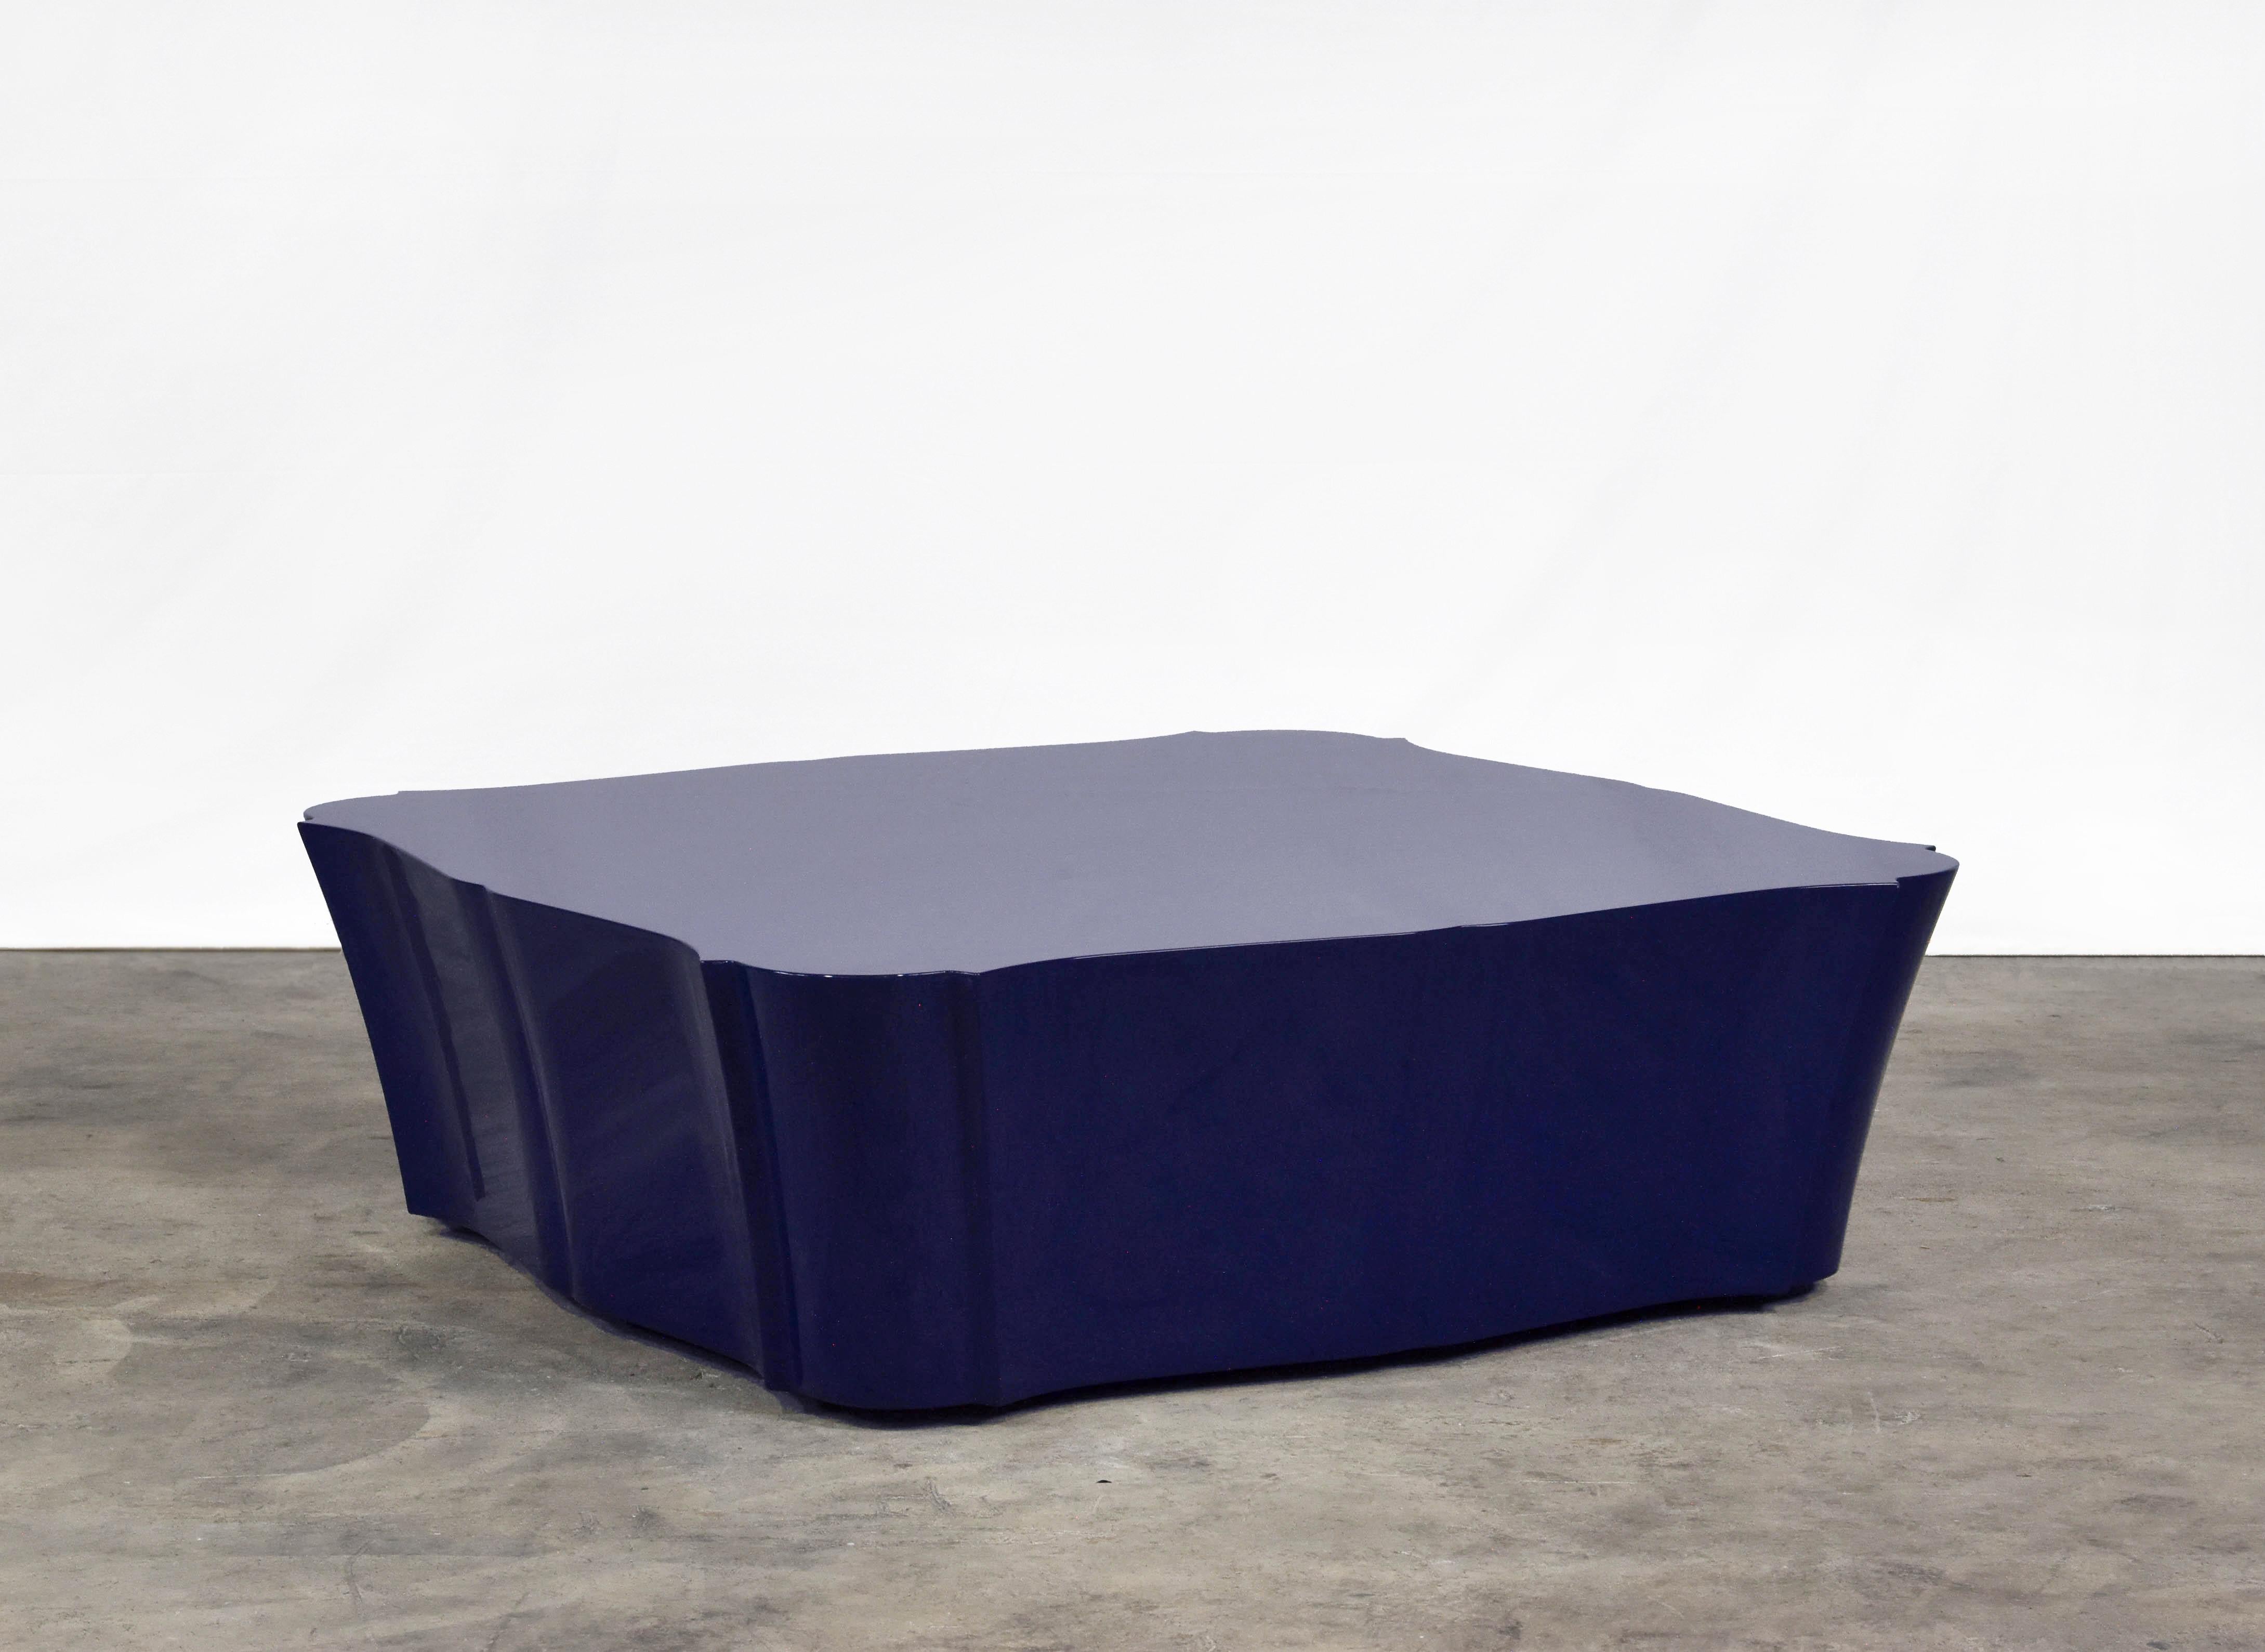 Contour by Paul Mathieu for Luxury Living is a series of coffee tables with sinuous and sculptural lines. Available in Prussian blue lacquer finish.
 